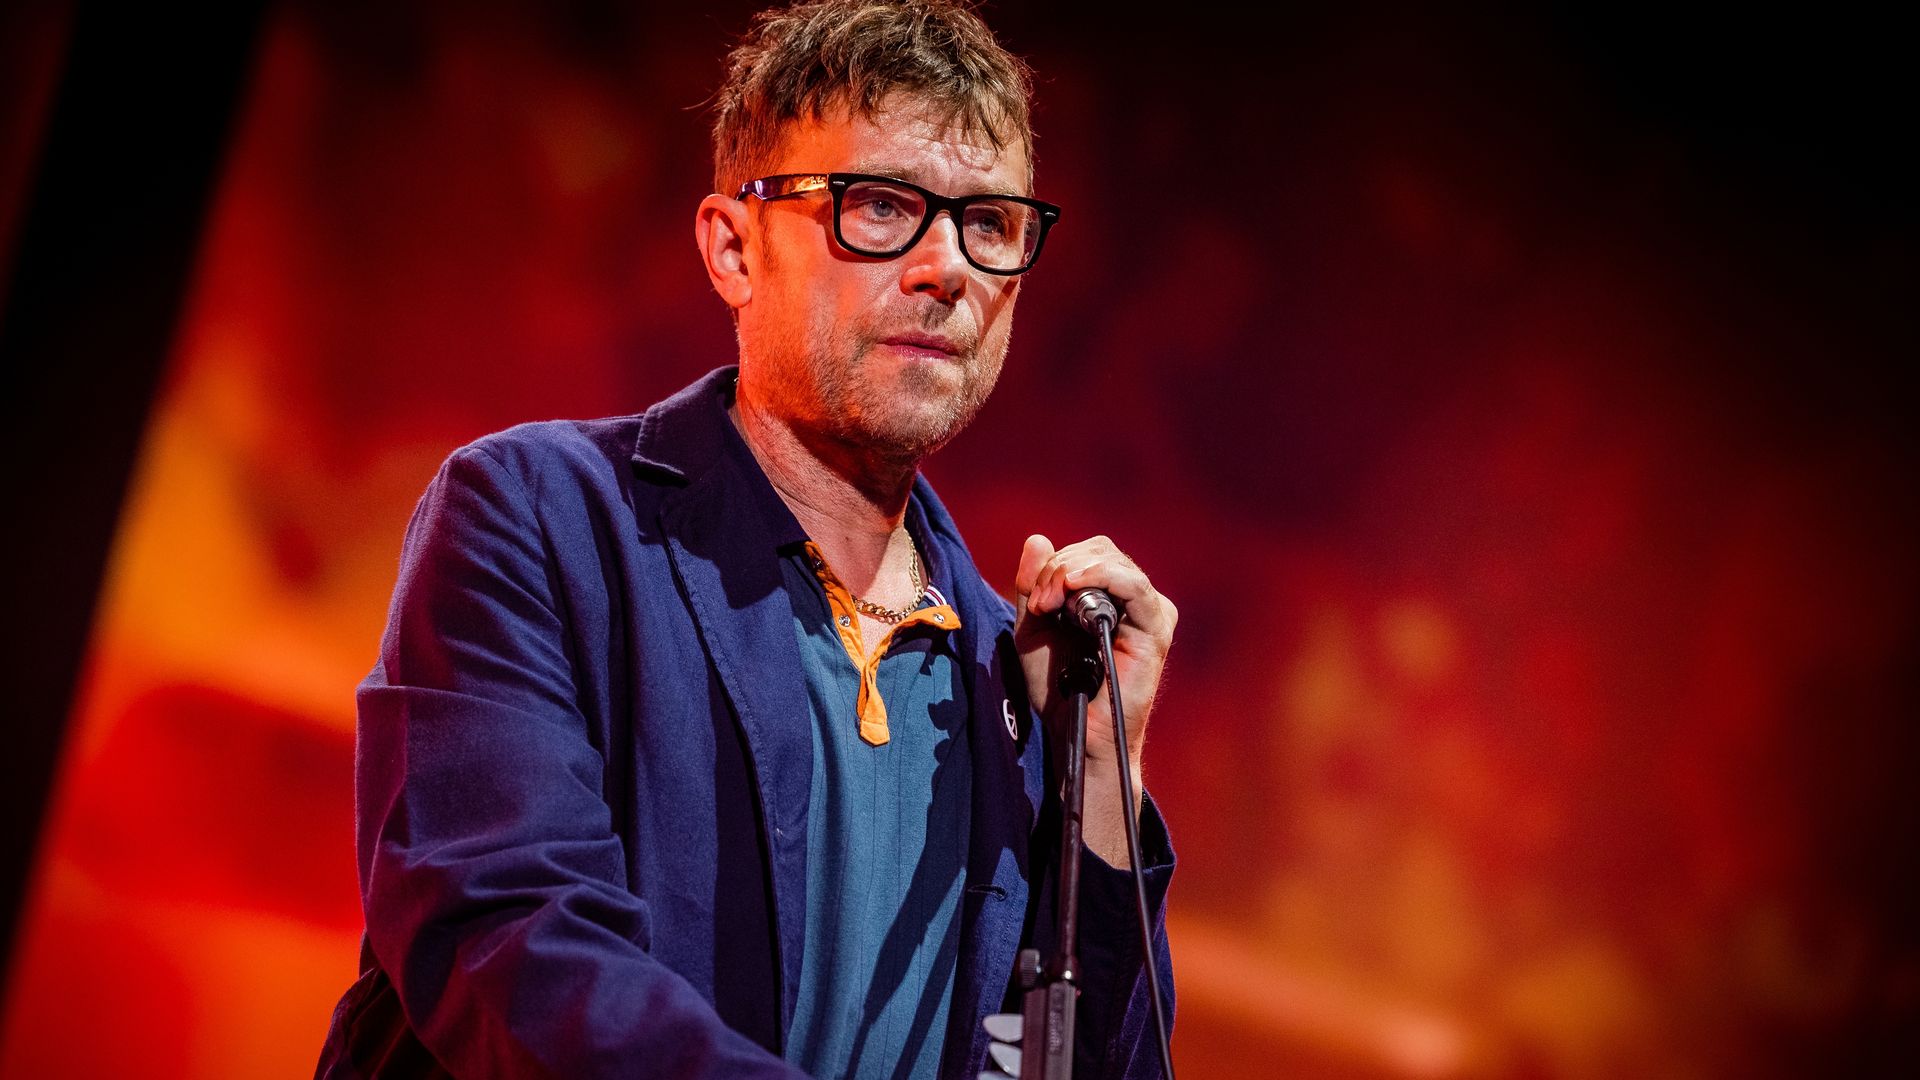 Damon Albarn on stage with Blur in a blue suit